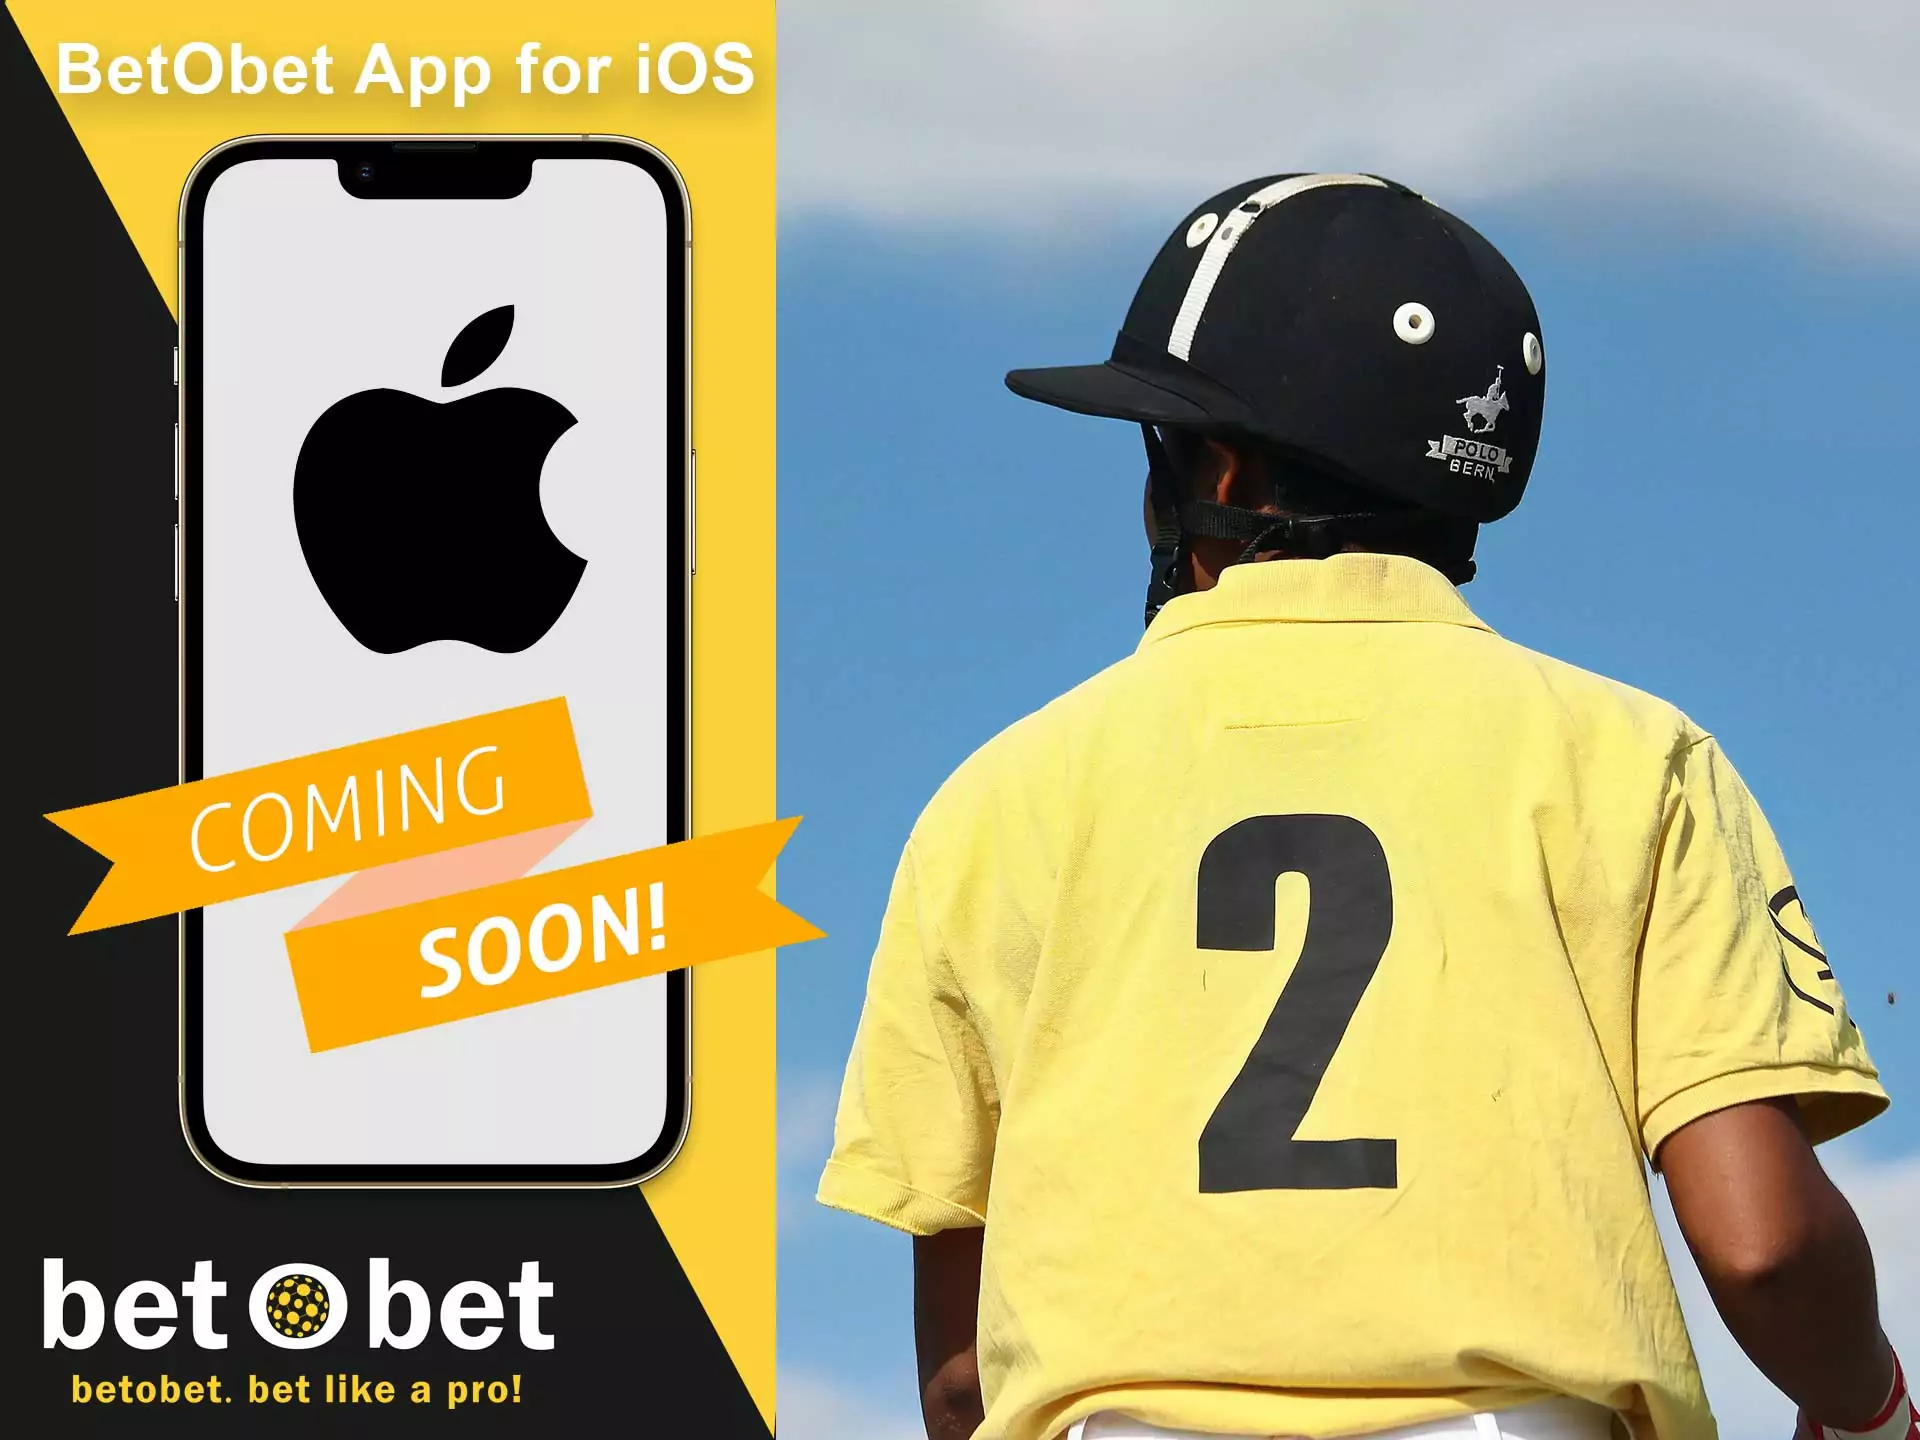 The Betobet app for iOS is in development.